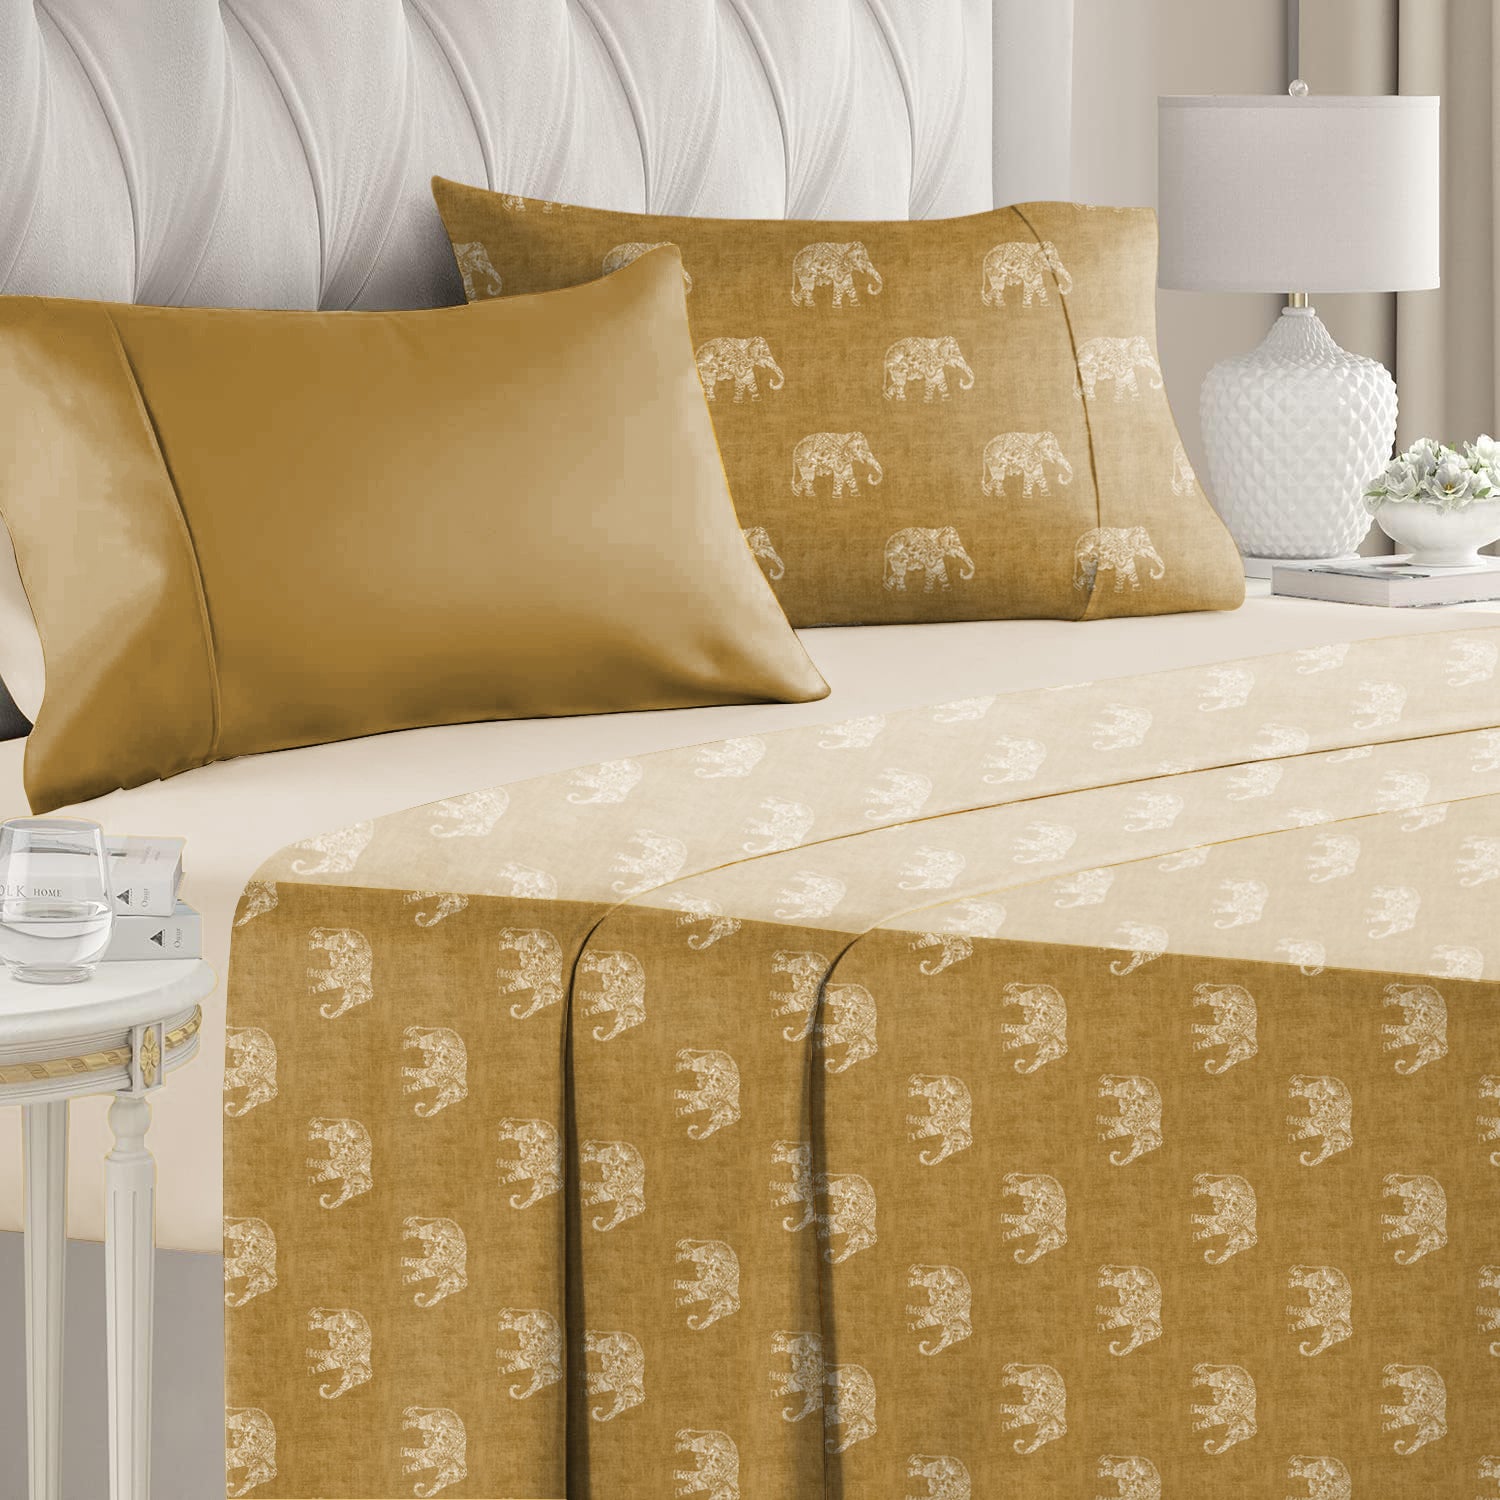 Jodhpur Elephant Bedsheet for Double Bed with 2 PillowCovers King Size (104" X 90") Camel